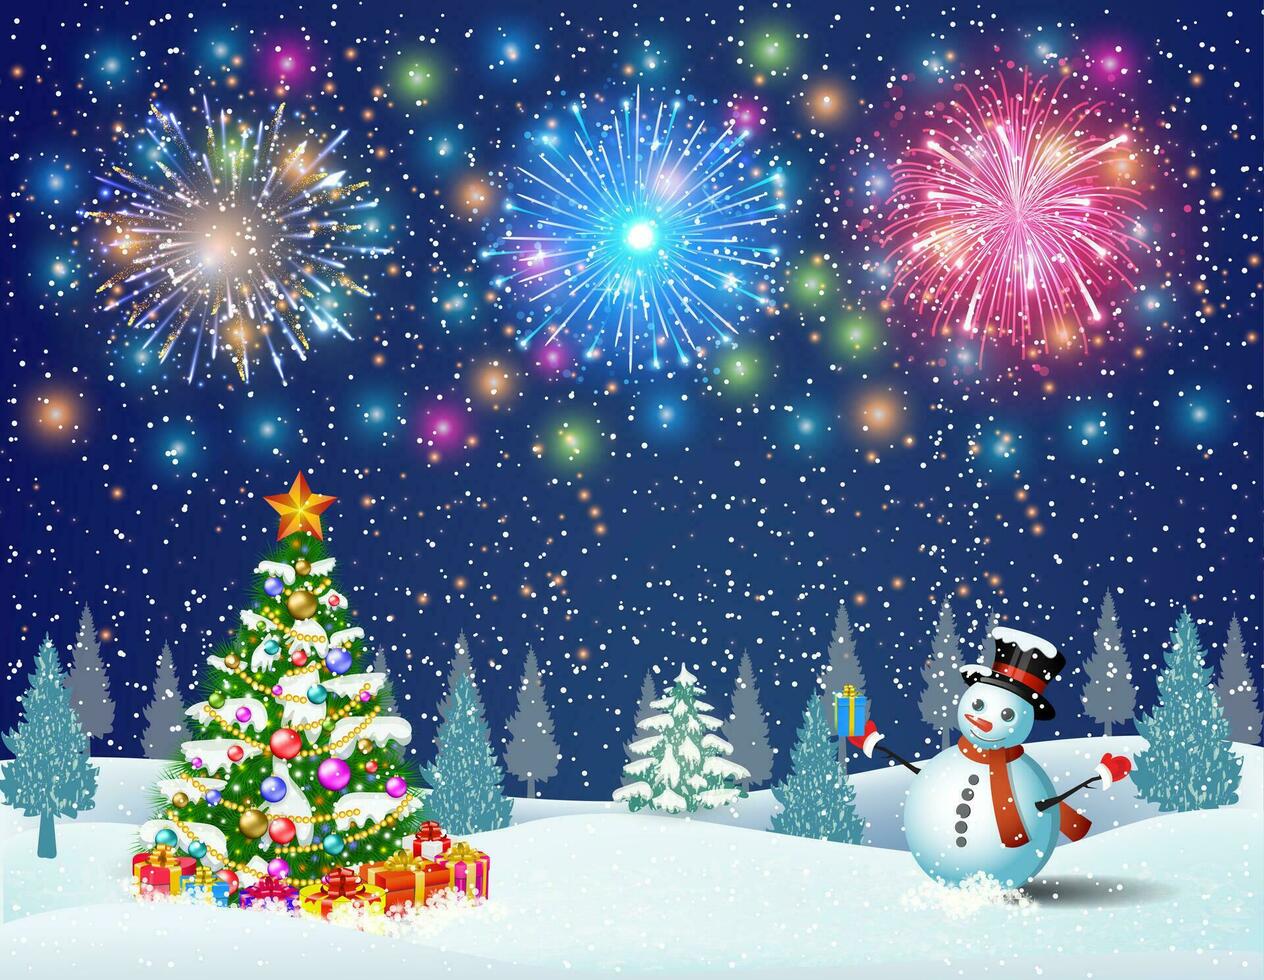 Christmas landscape at night vector